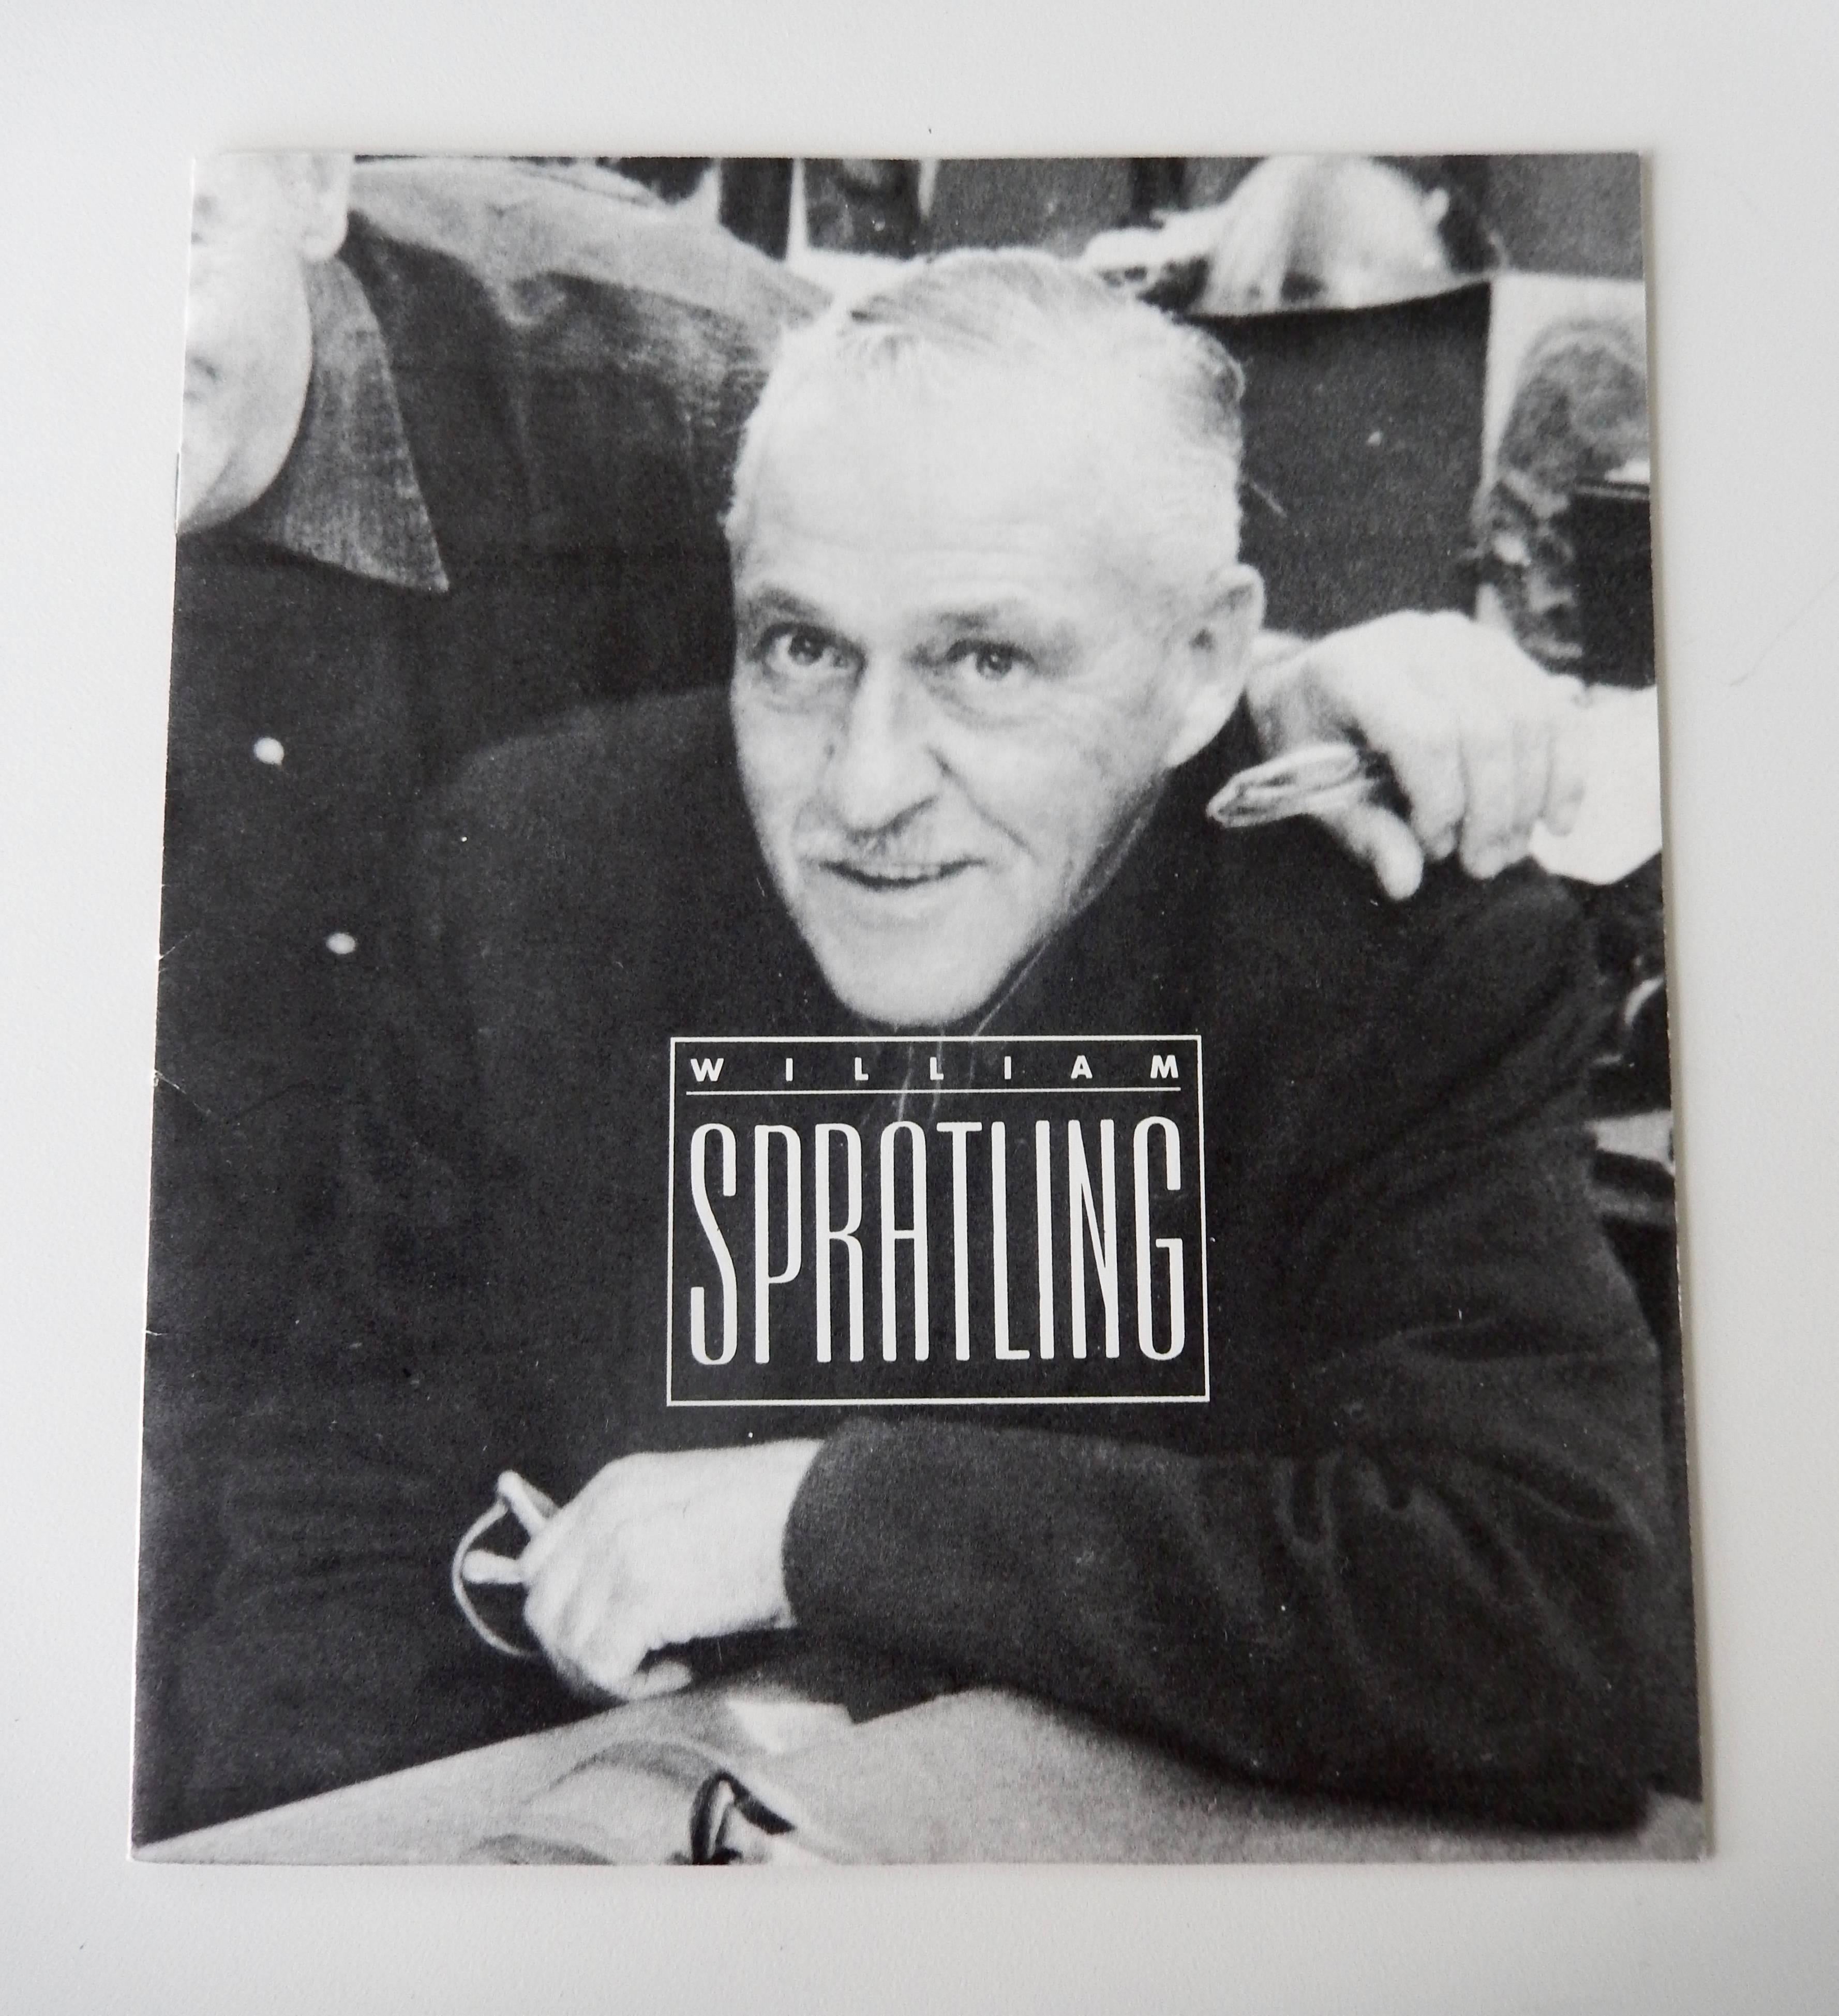 A scarce, complete boxed portfolio of 49 reproductions of original designs by the master, modern silversmith William Spratling. This special edition coincides with the 1978 exhibition, William Spratling/Plata, at the Centro Cultural Arte